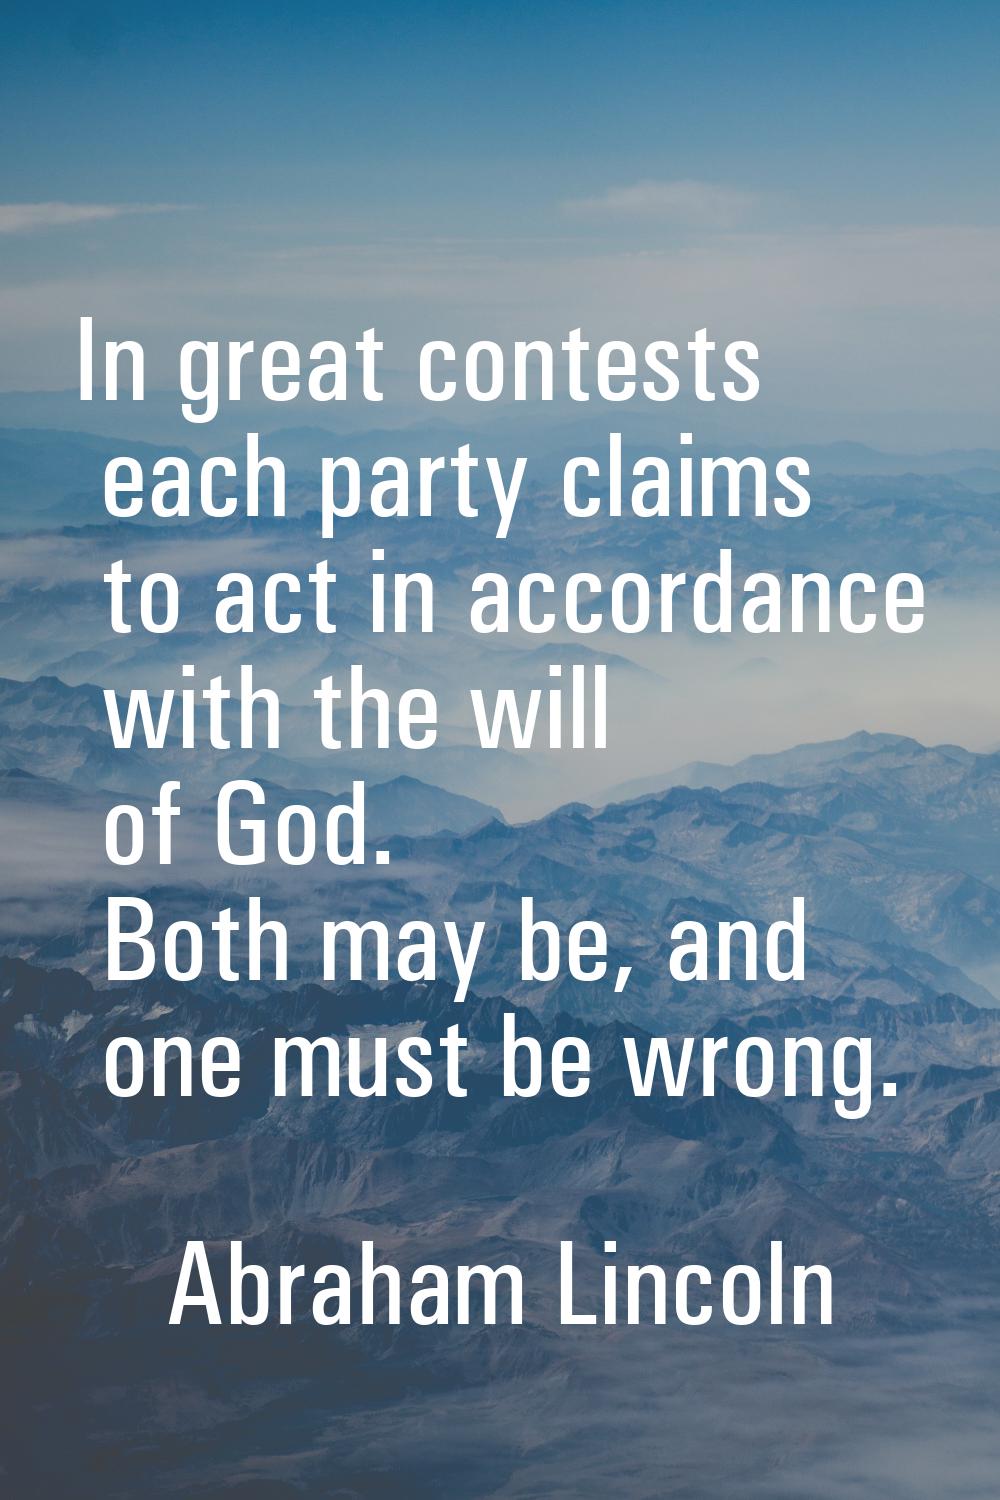 In great contests each party claims to act in accordance with the will of God. Both may be, and one